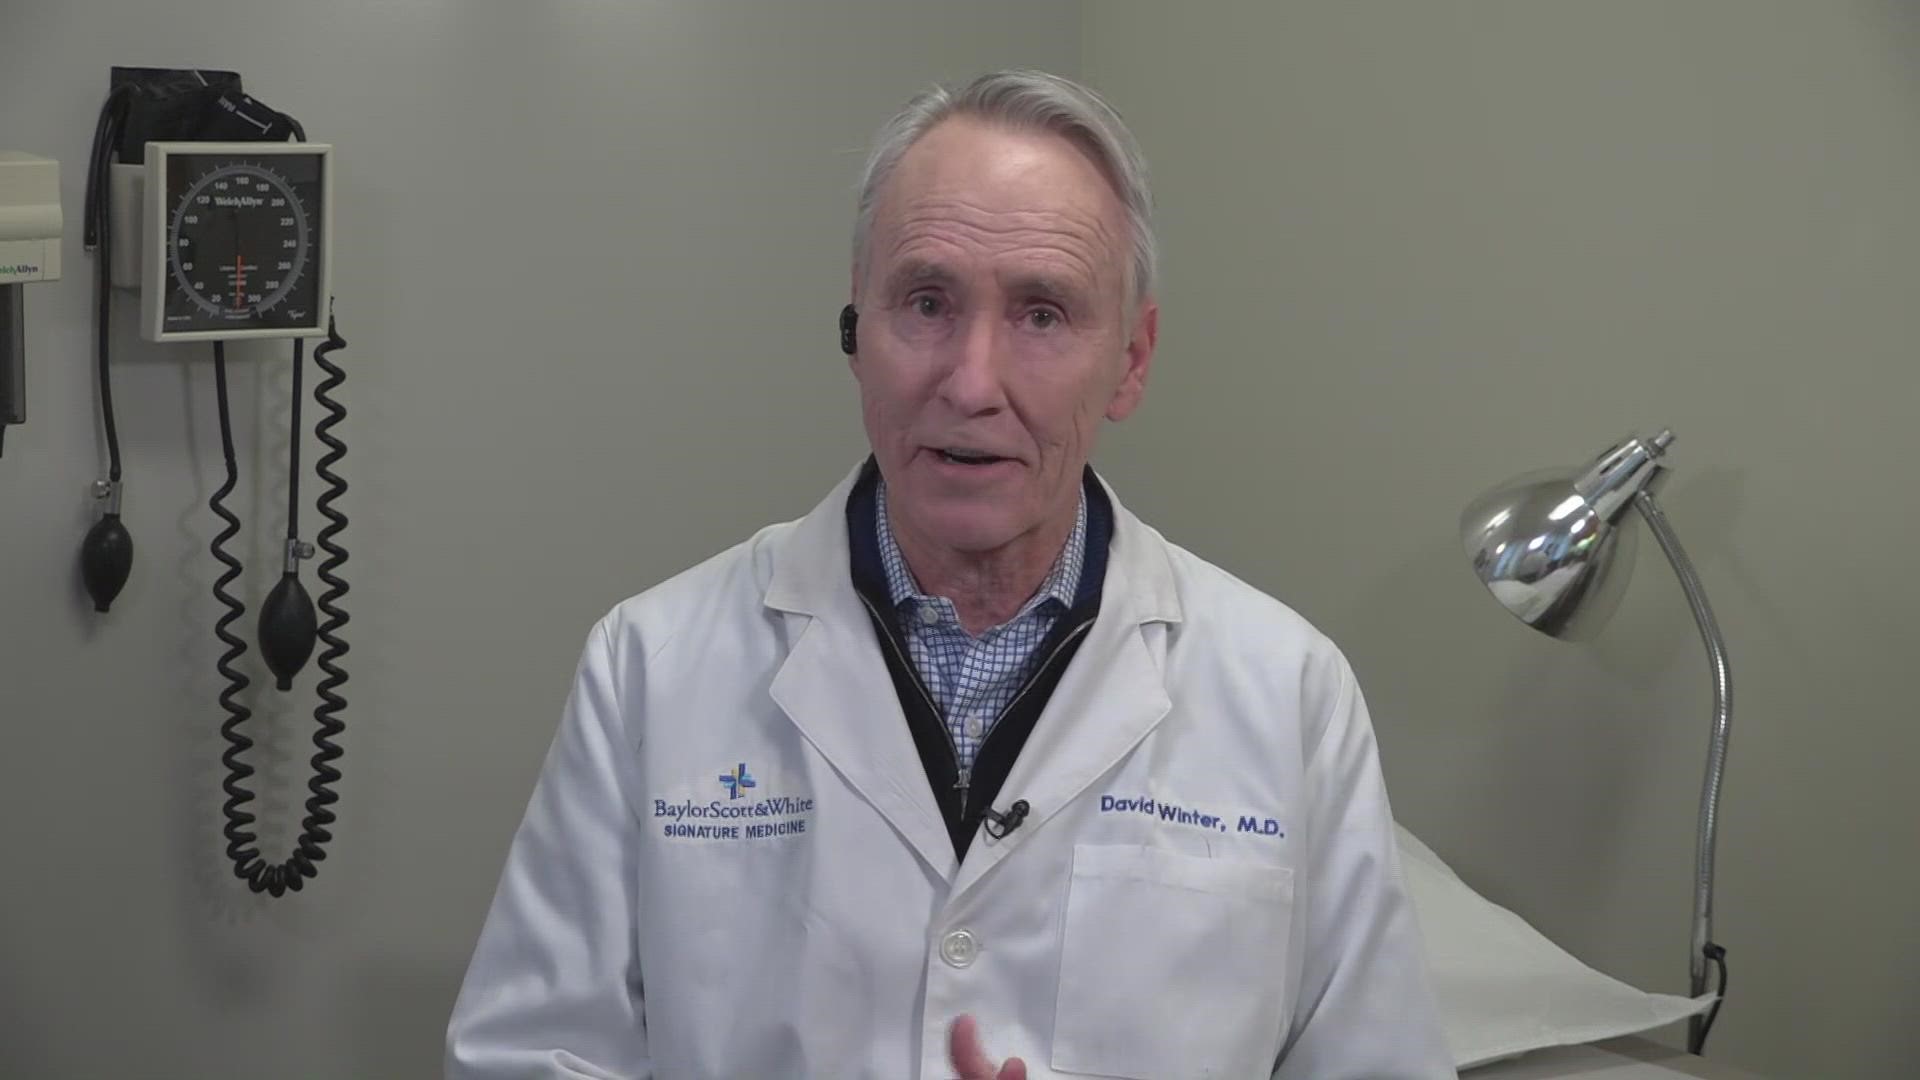 Dr. David Winter from Baylor Scott & White Health answers questions as respiratory viruses continue to rise across North Texas.